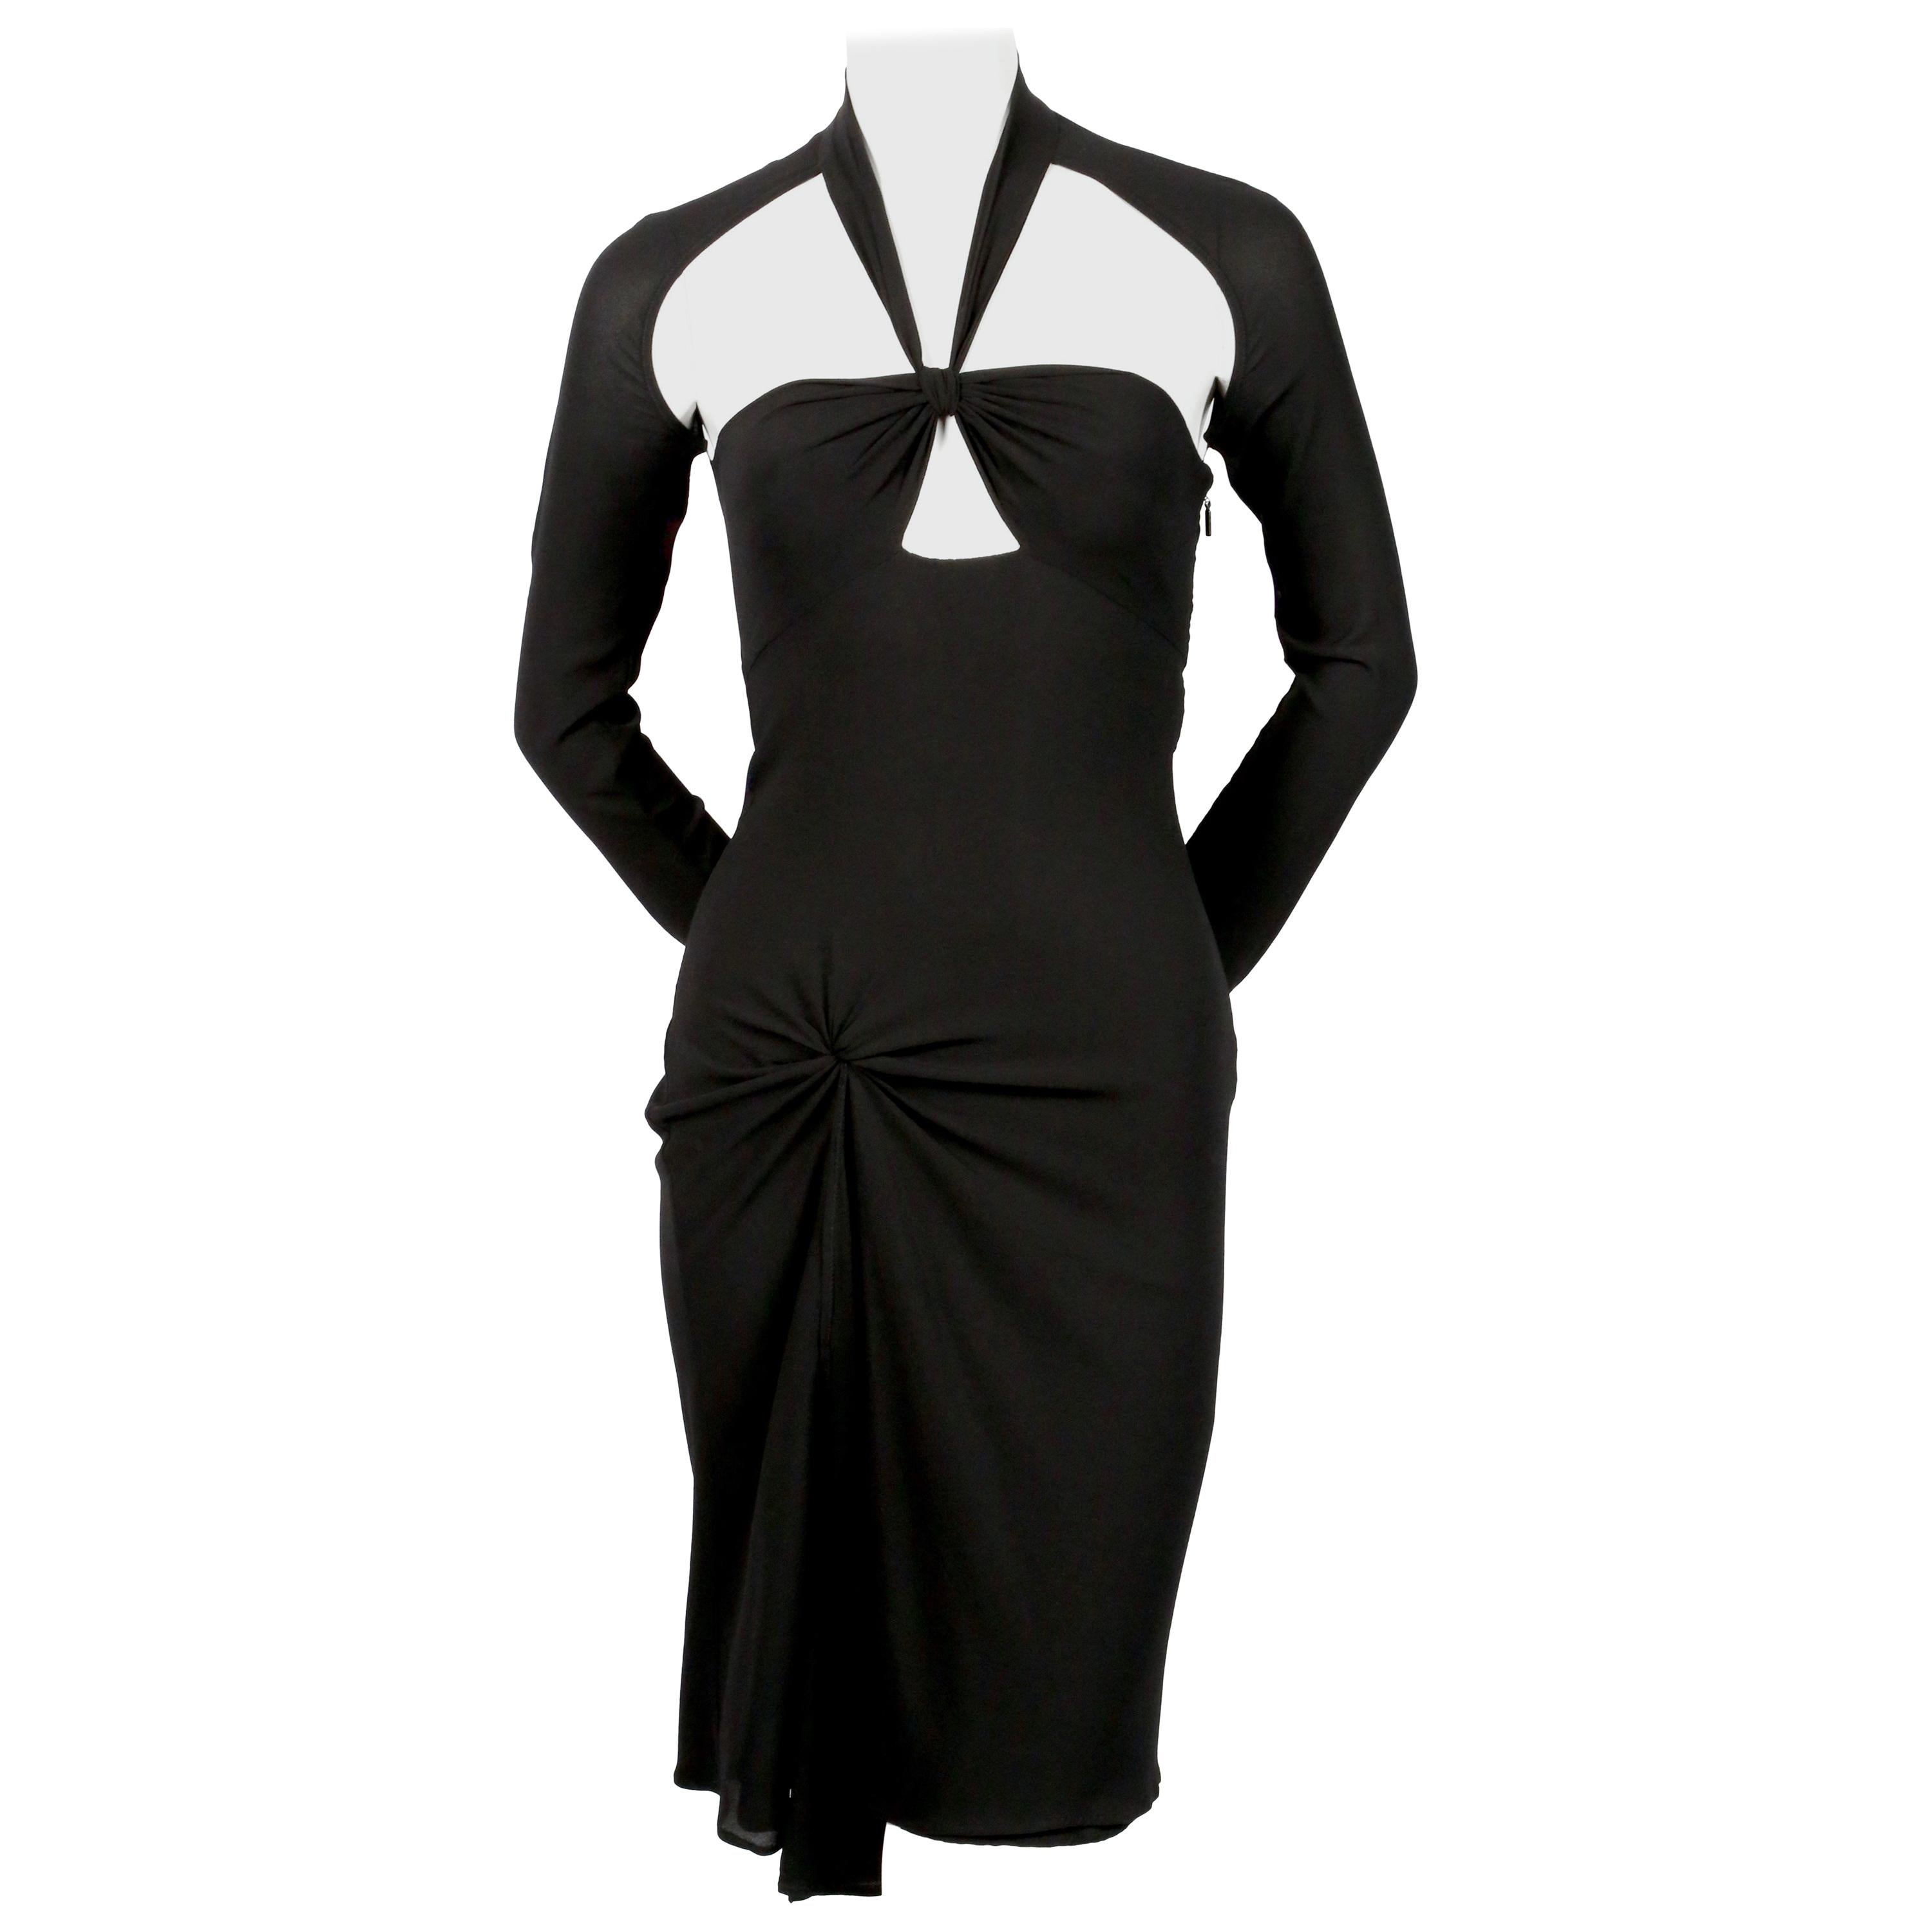 2003 GUCCI by TOM FORD black silk dress with cut-outs